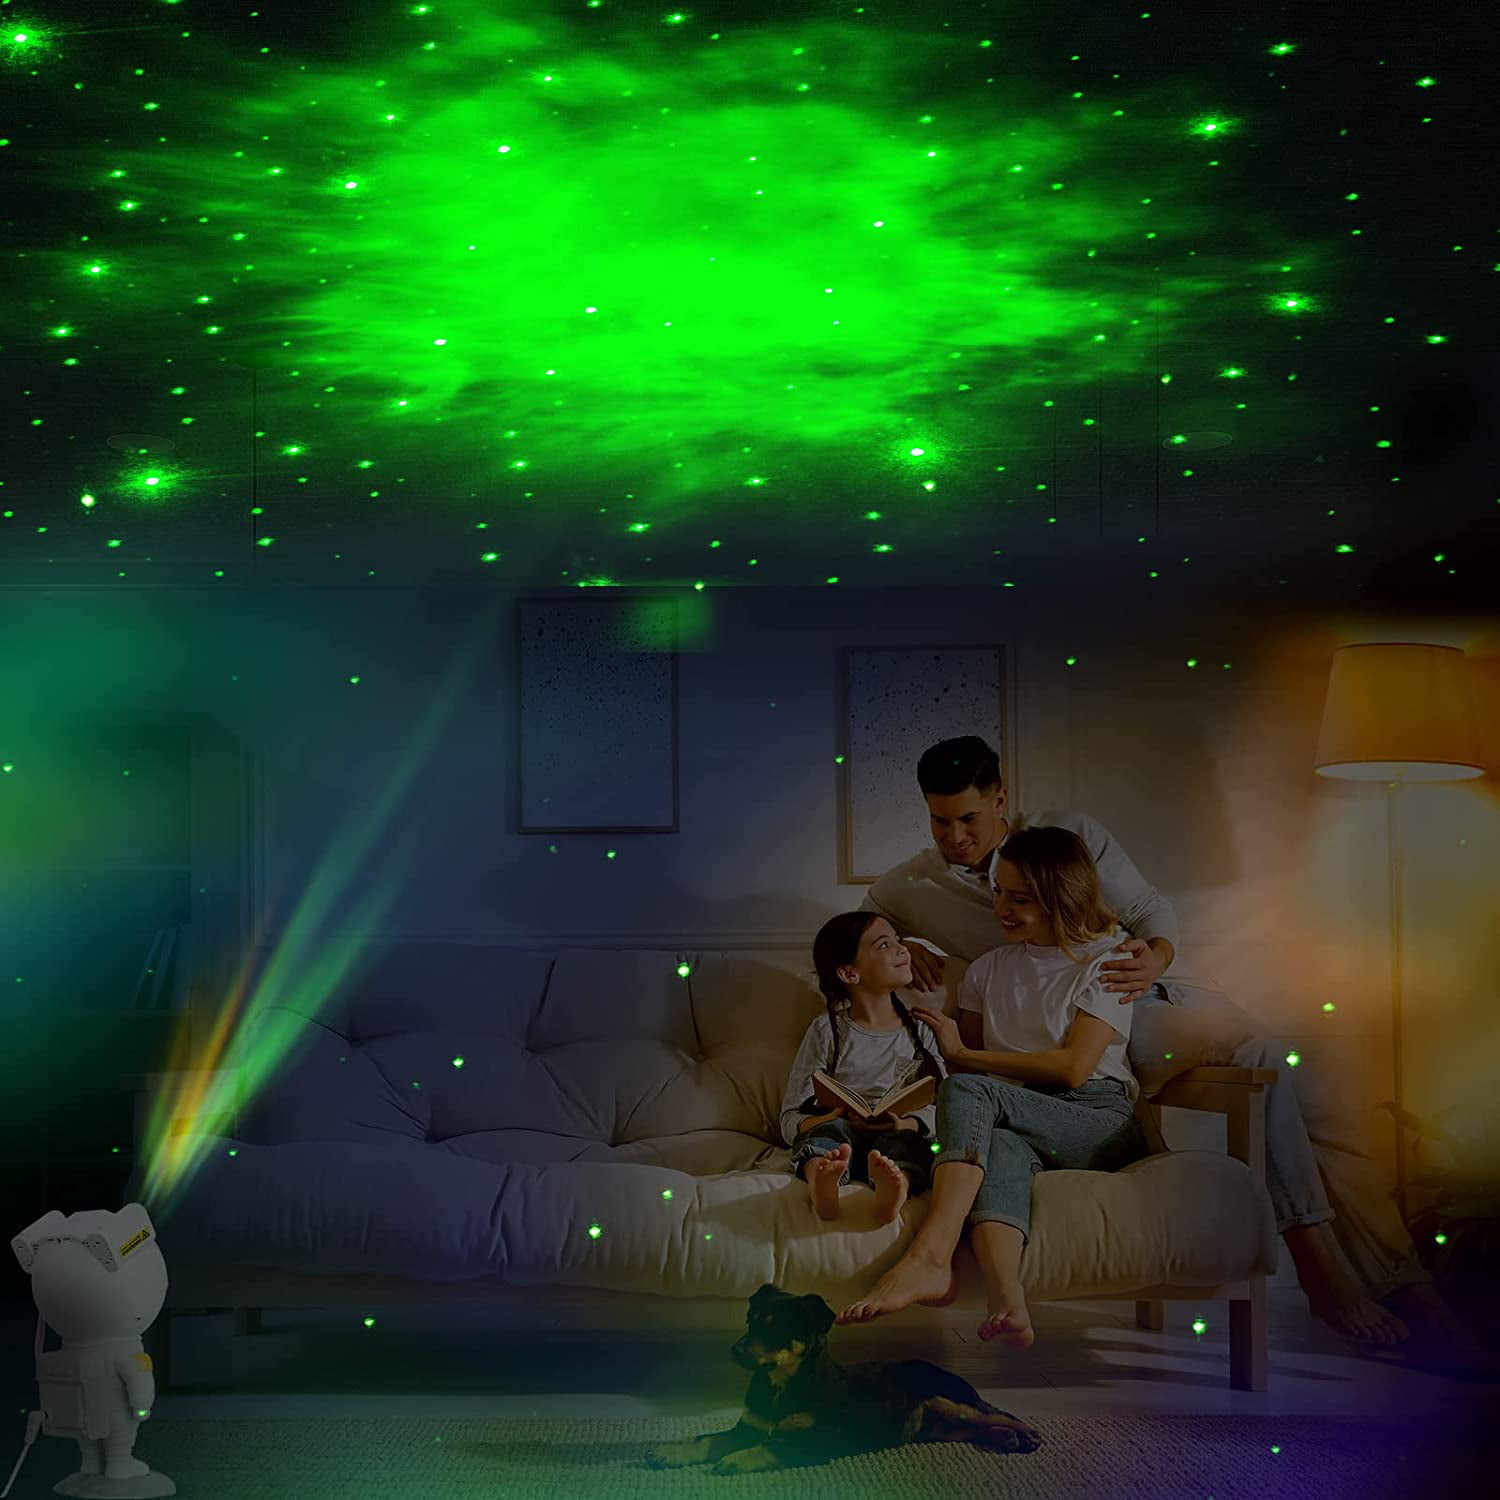 100PCS SIMAGENMAI Star Projector Galaxy Night Light - Astronaut Space Buddy  Projector, Starry Nebula Ceiling LED Lamp with Timer and Remote,Gifts for  Christmas, Birthdays, Valentine's Day etc. 